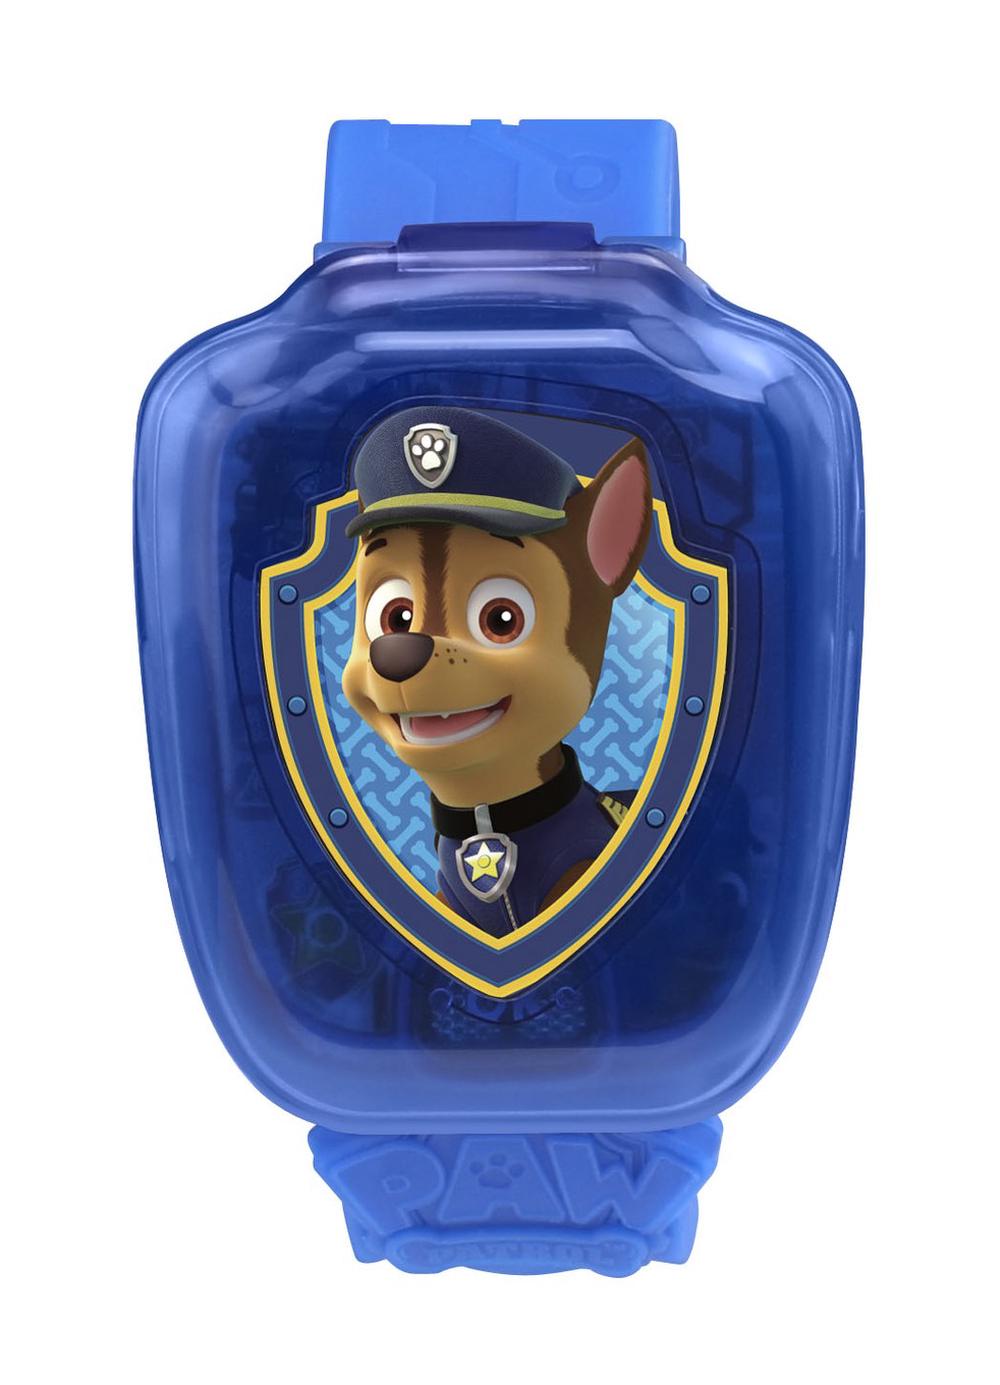 VTech Toys Paw Patrol - Learning Watch | Buy online at